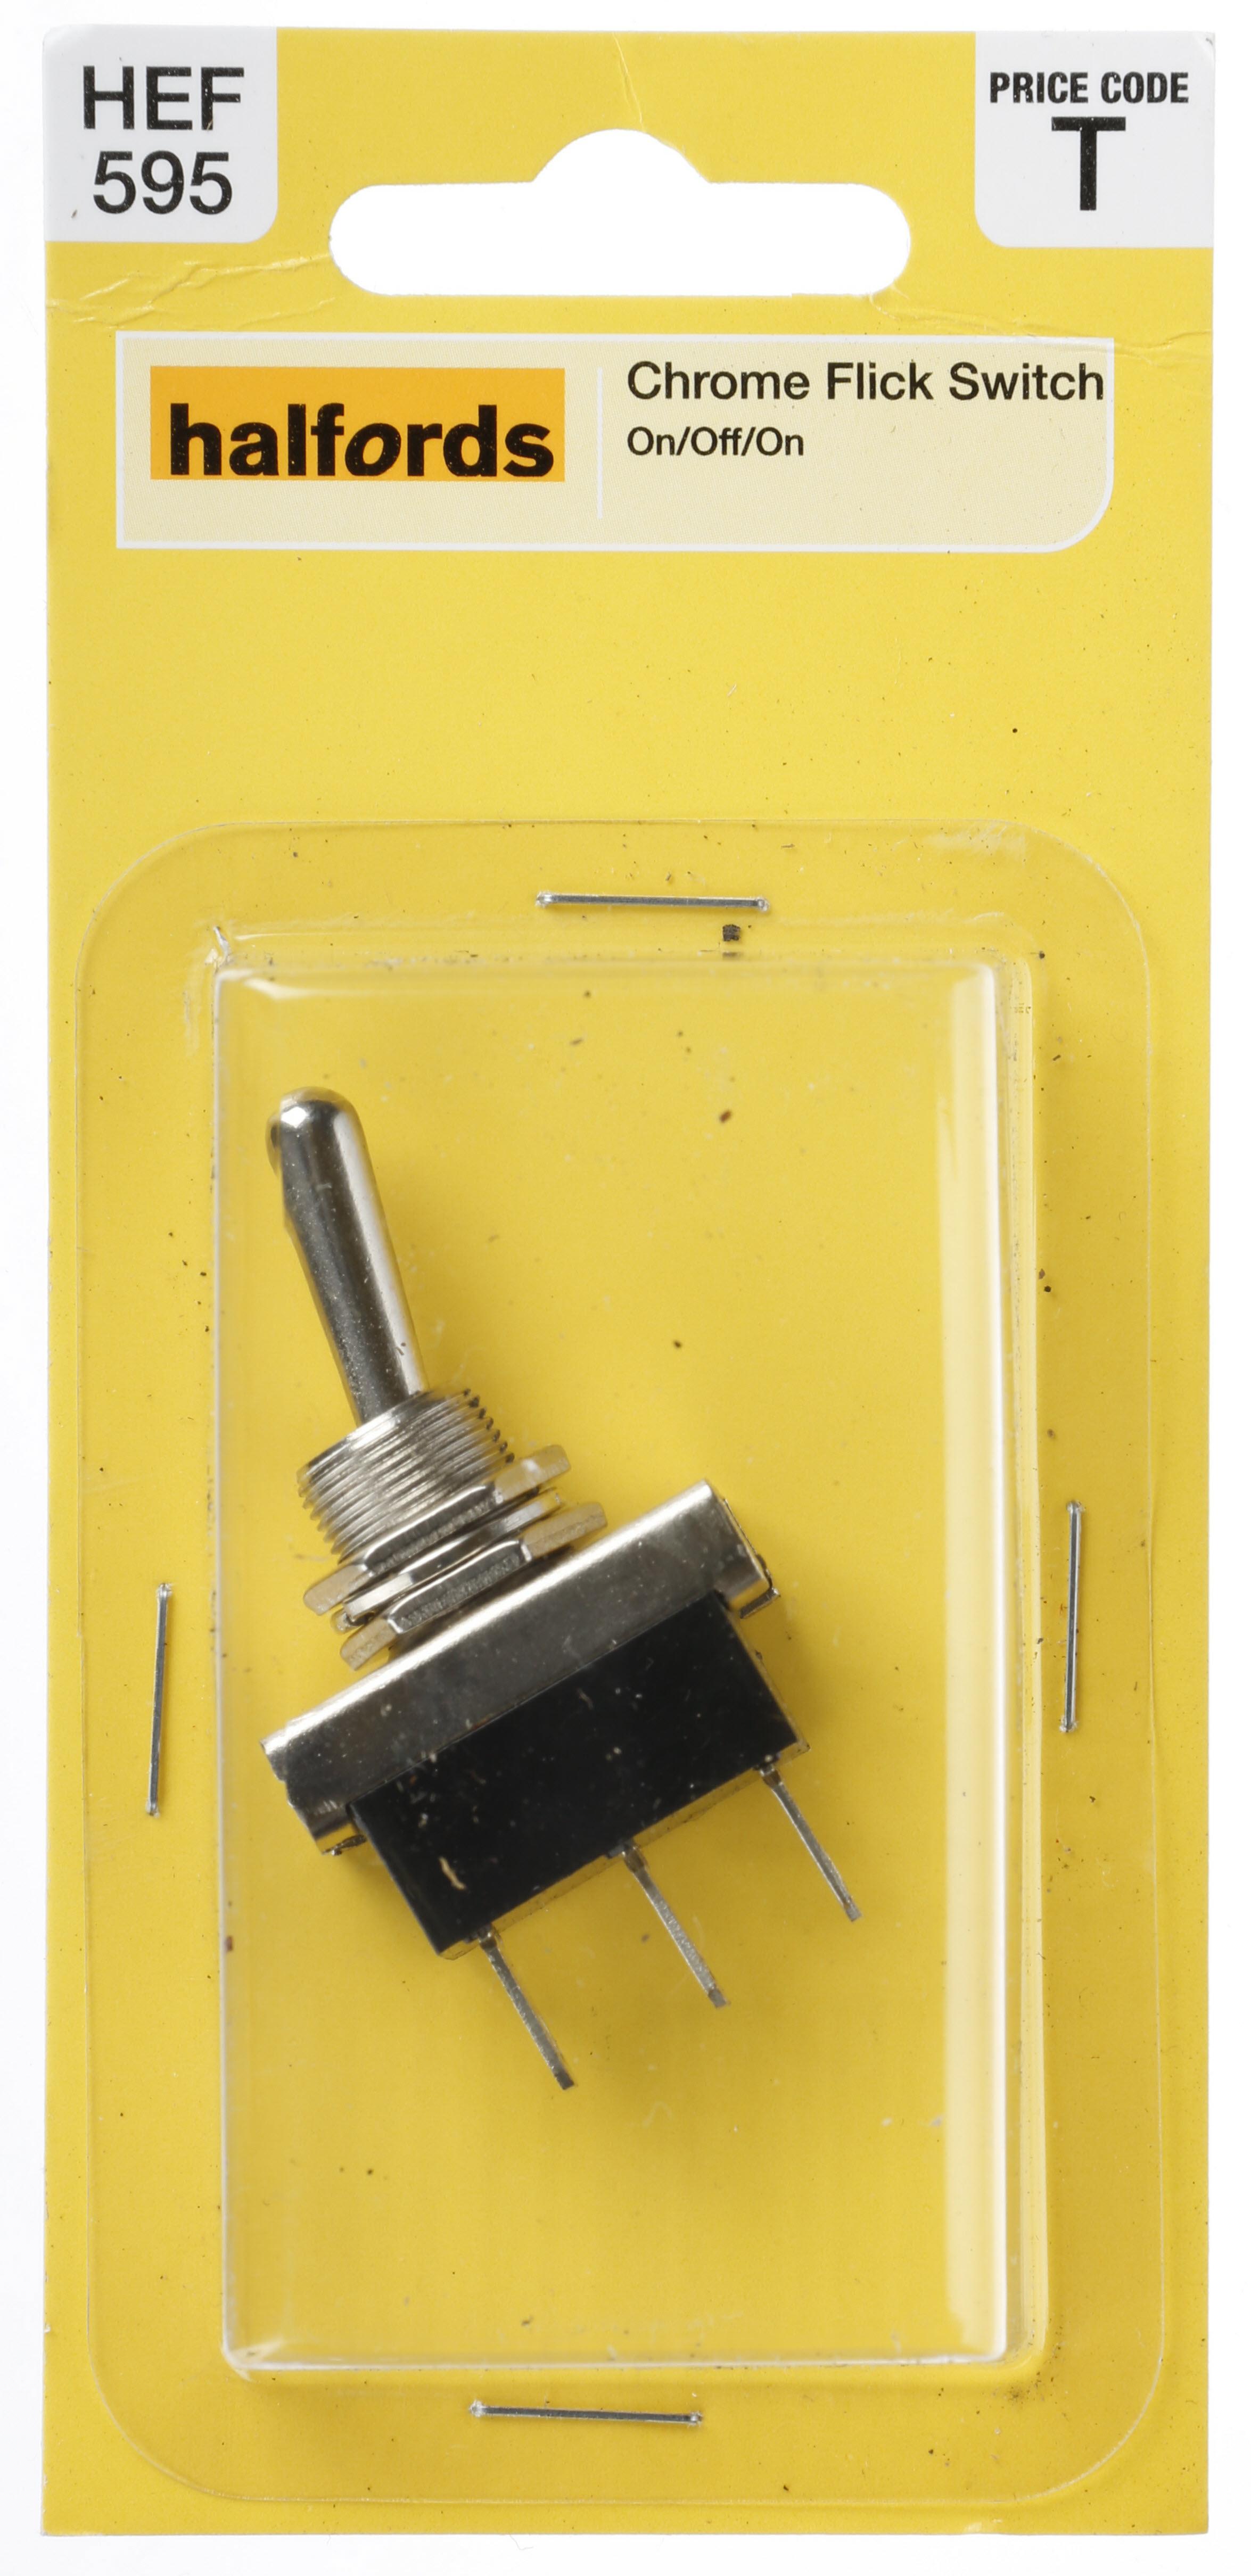 Halfords Toggle Switch On/Off Metal Heavy Duty Non Illuminated (Hef595)